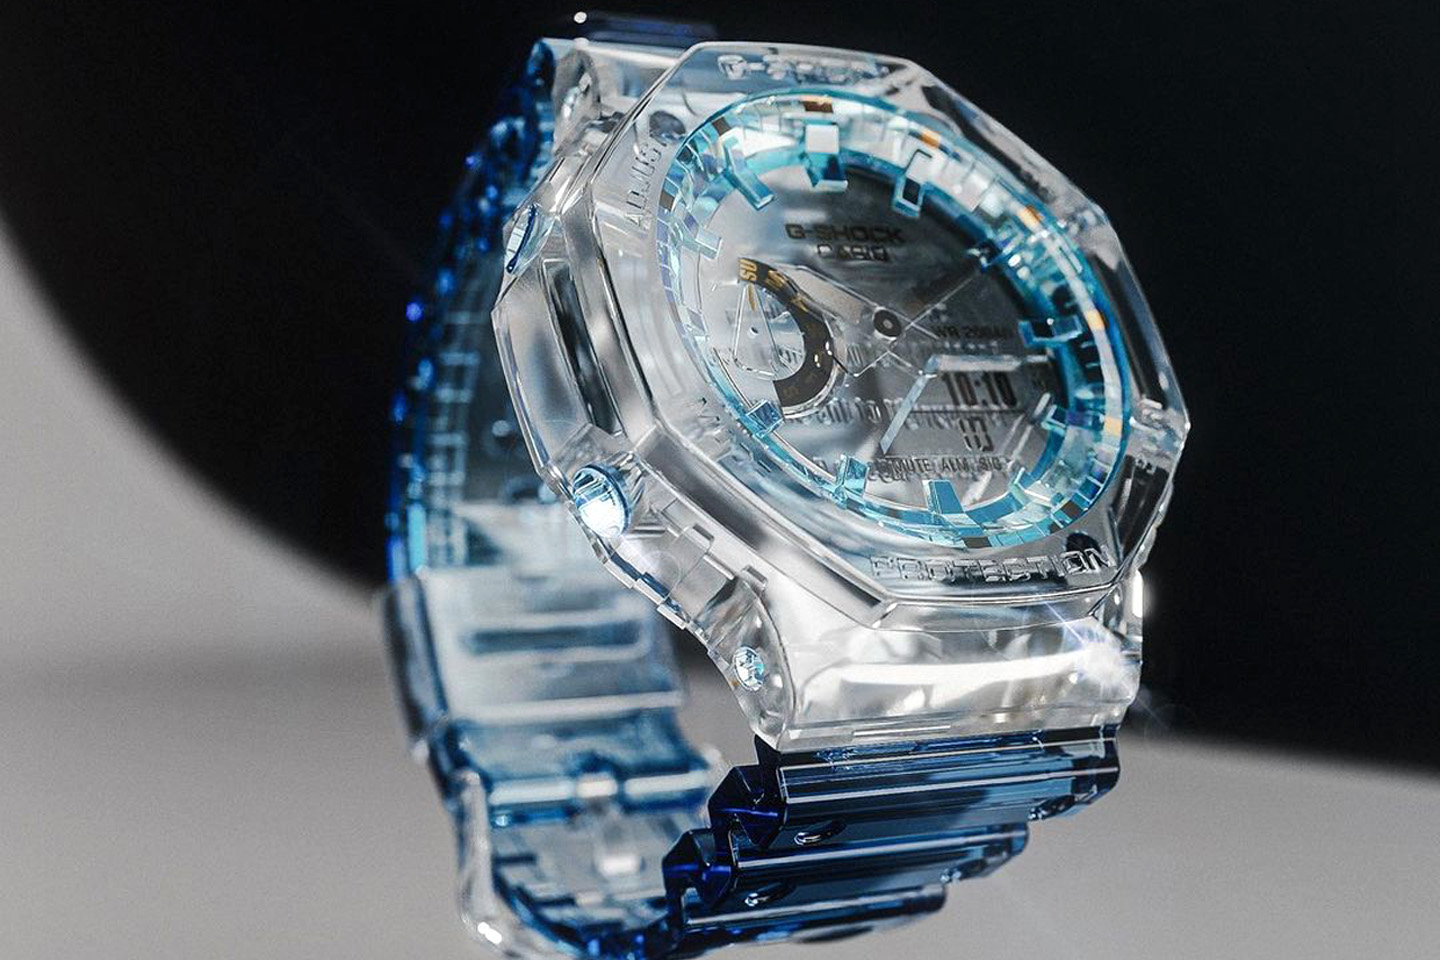 #Top 10 innovative watches to inspire you from the YD x KeyShot Inspiration Hub